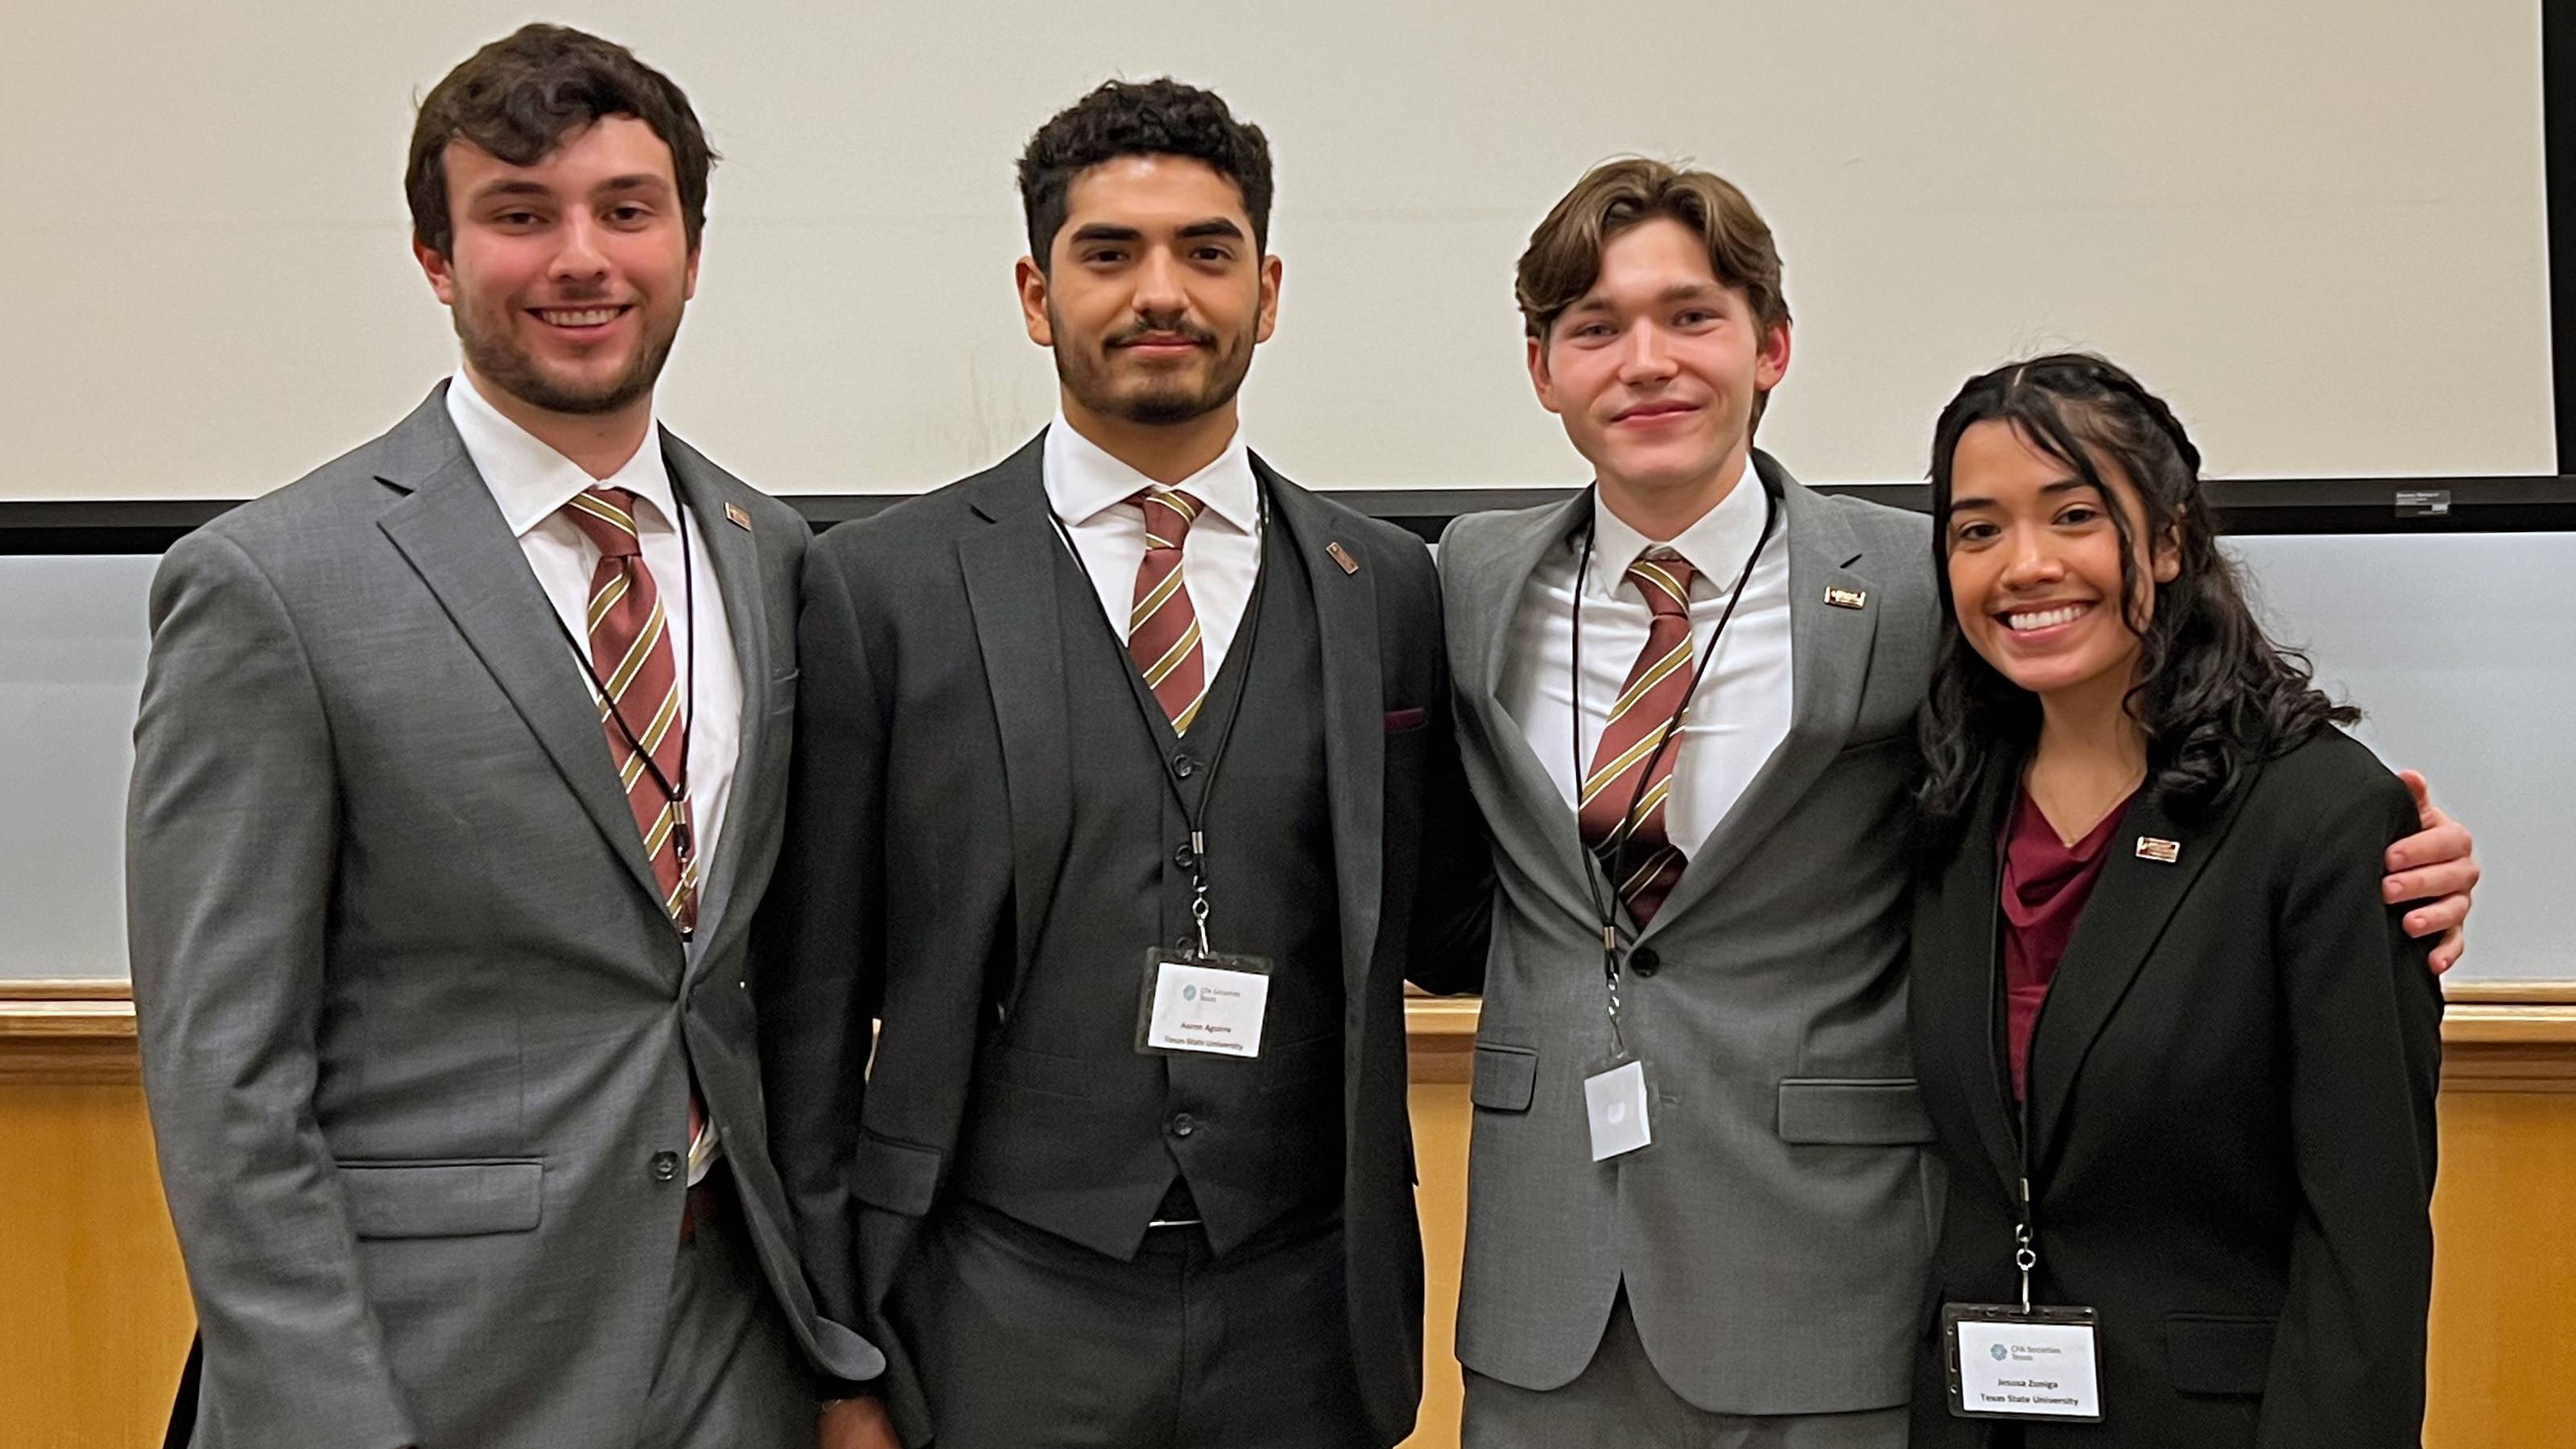 Four college students in business attire smiling and posing indoors.